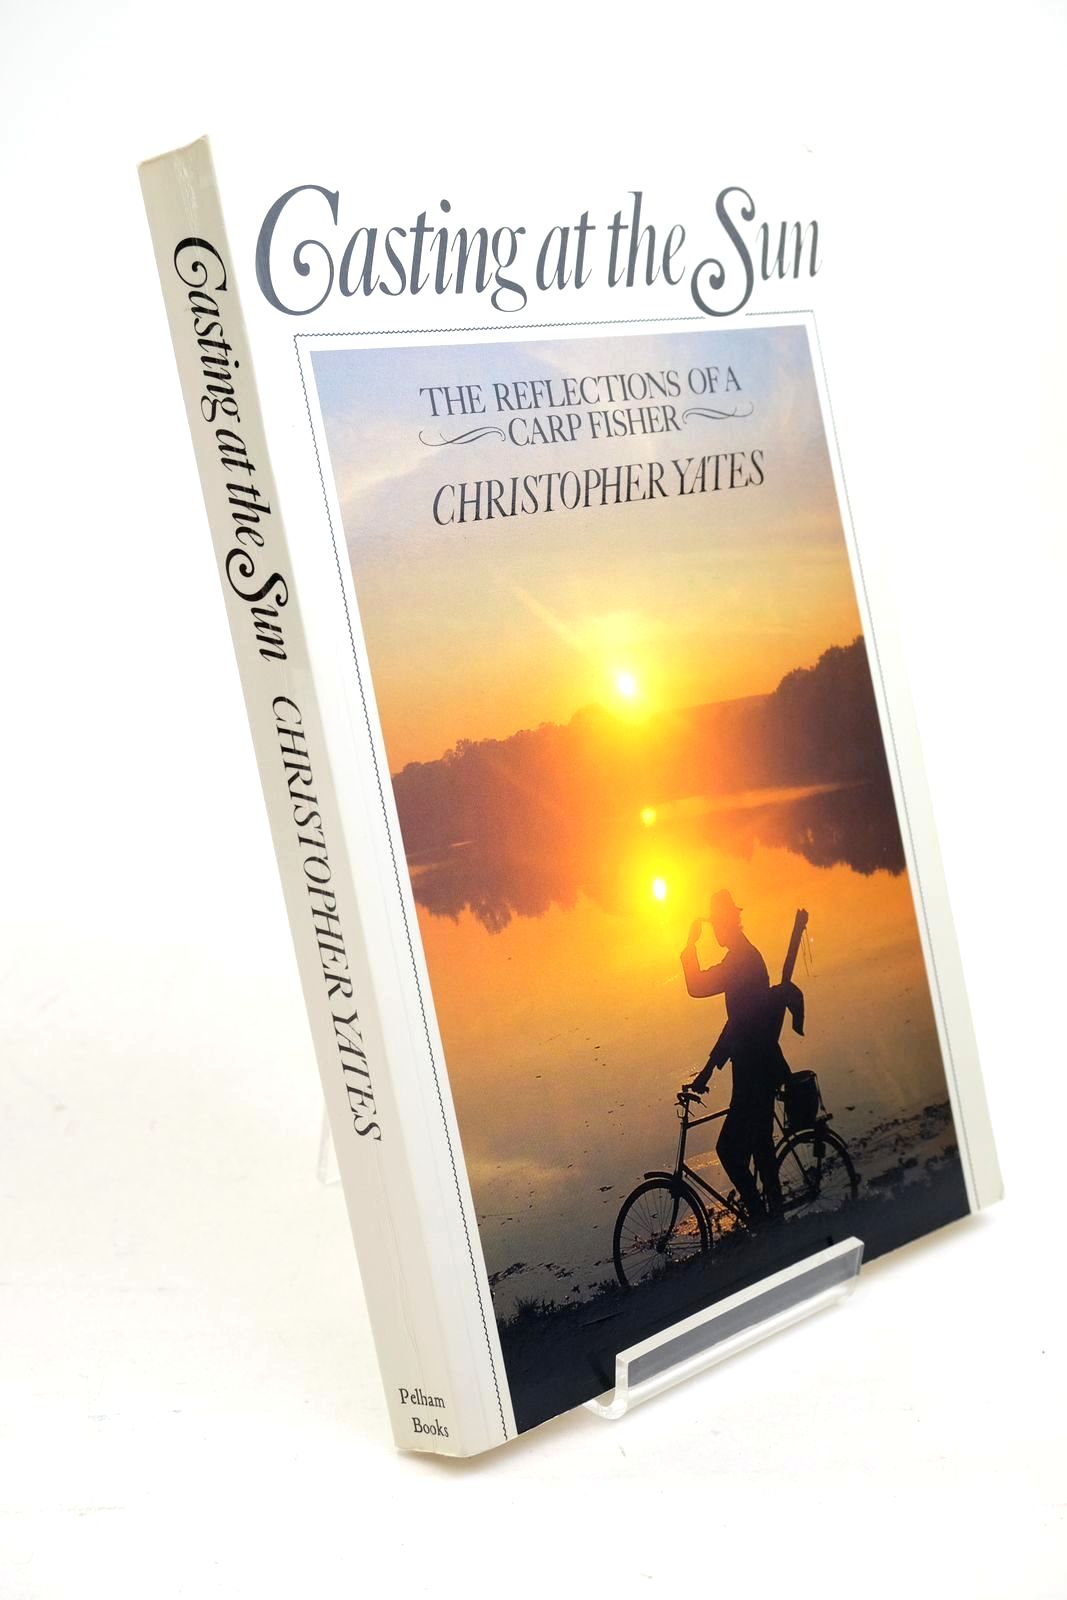 Photo of CASTING AT THE SUN: THE REFLECTIONS OF A CARP FISHER written by Yates, Christopher published by Pelham Books (STOCK CODE: 1321204)  for sale by Stella & Rose's Books